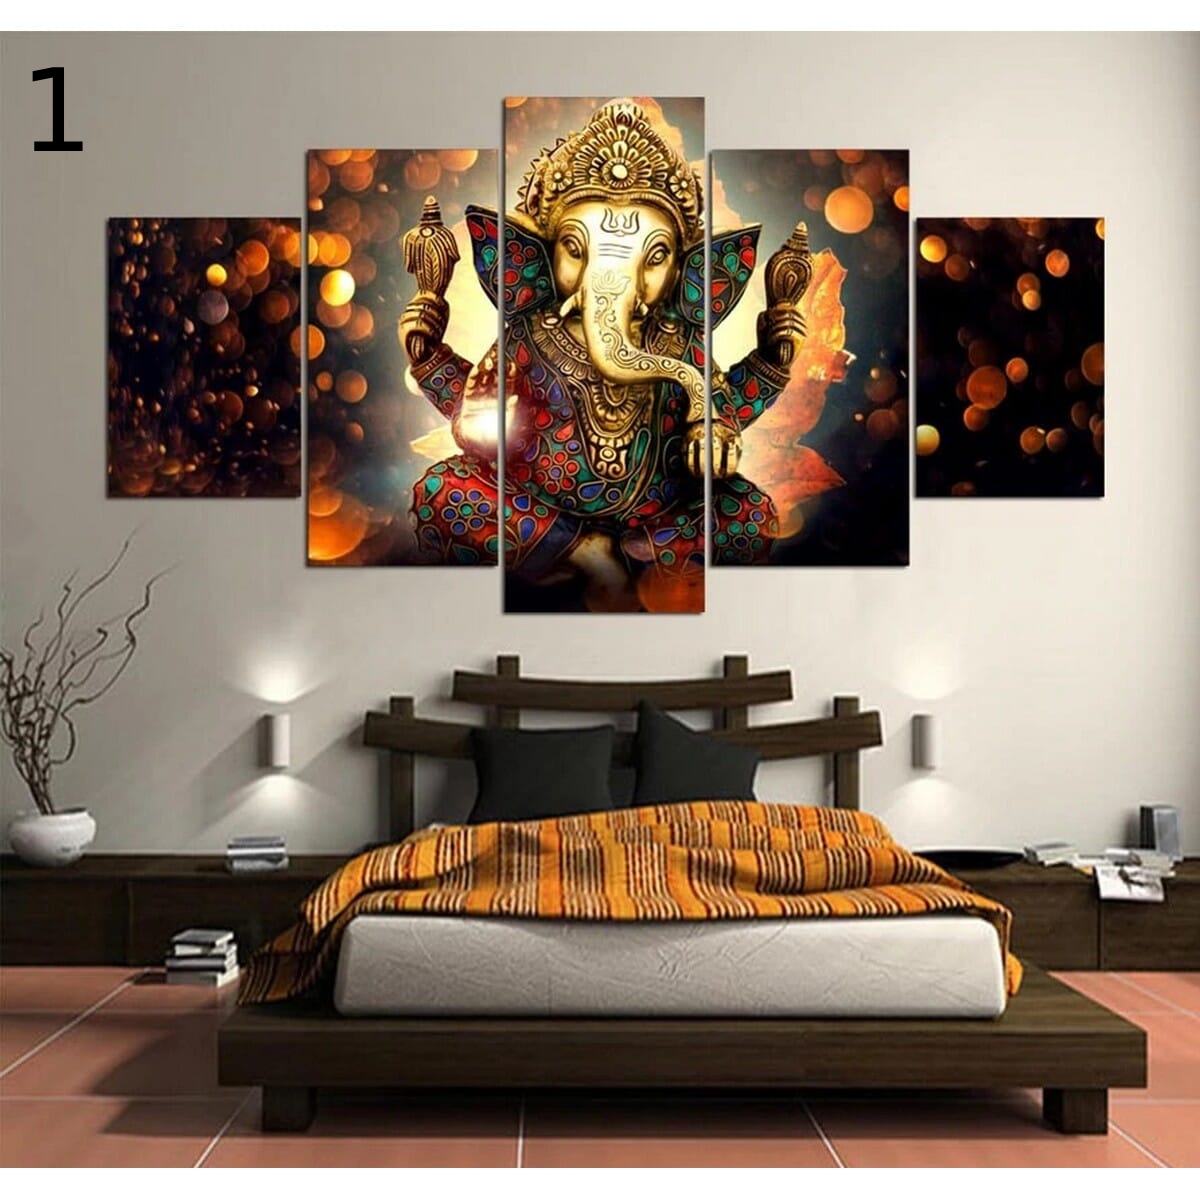 FIVE PANEL CANVAS ART FOR HOME BEDROOM DECORATION